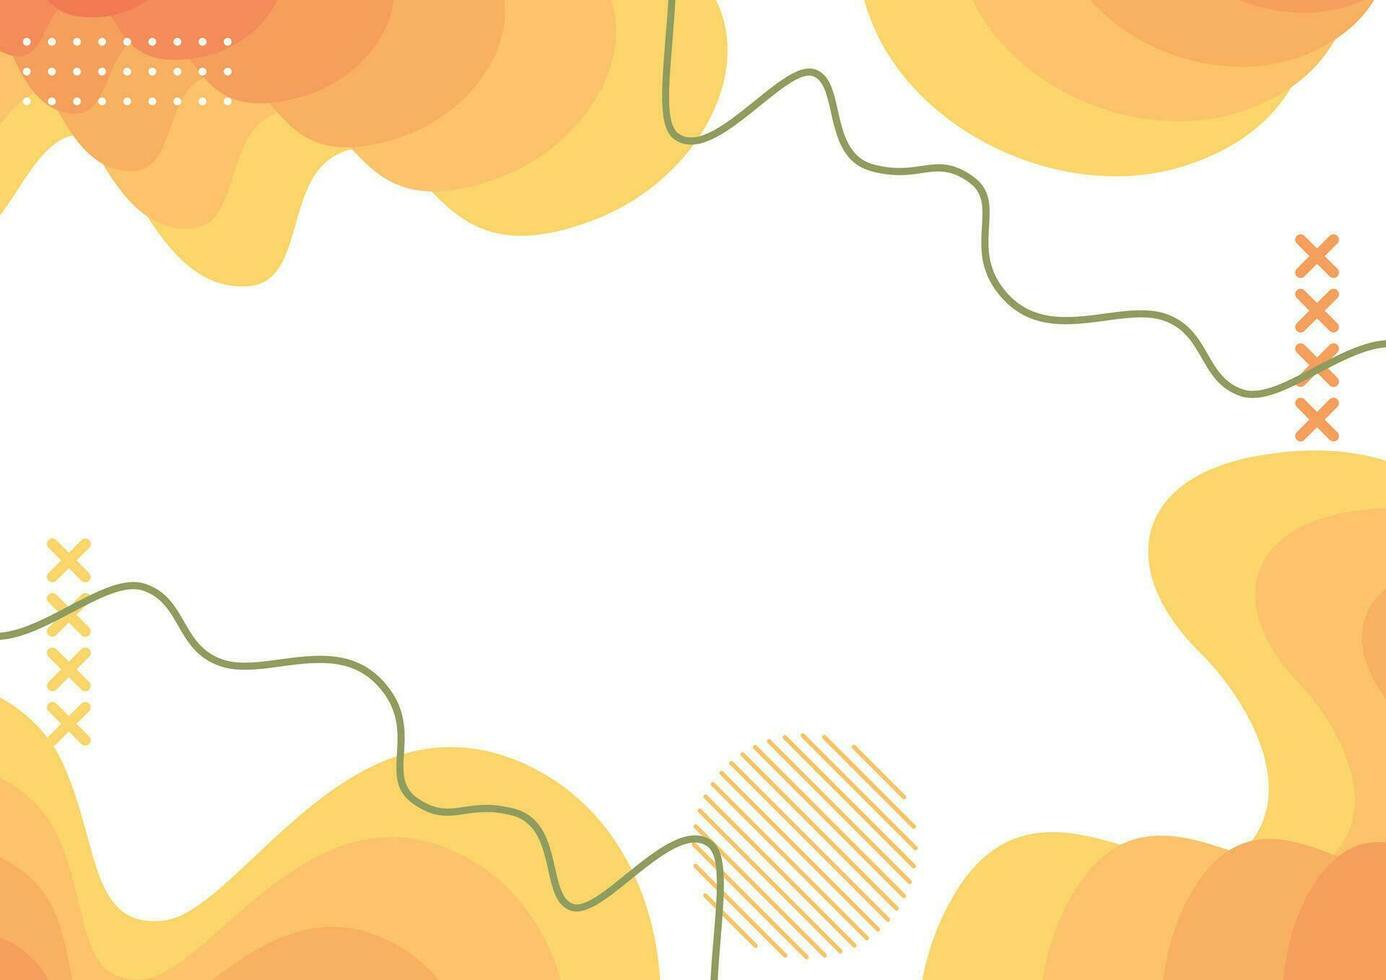 White and yellow fluid shapes abstract background vector